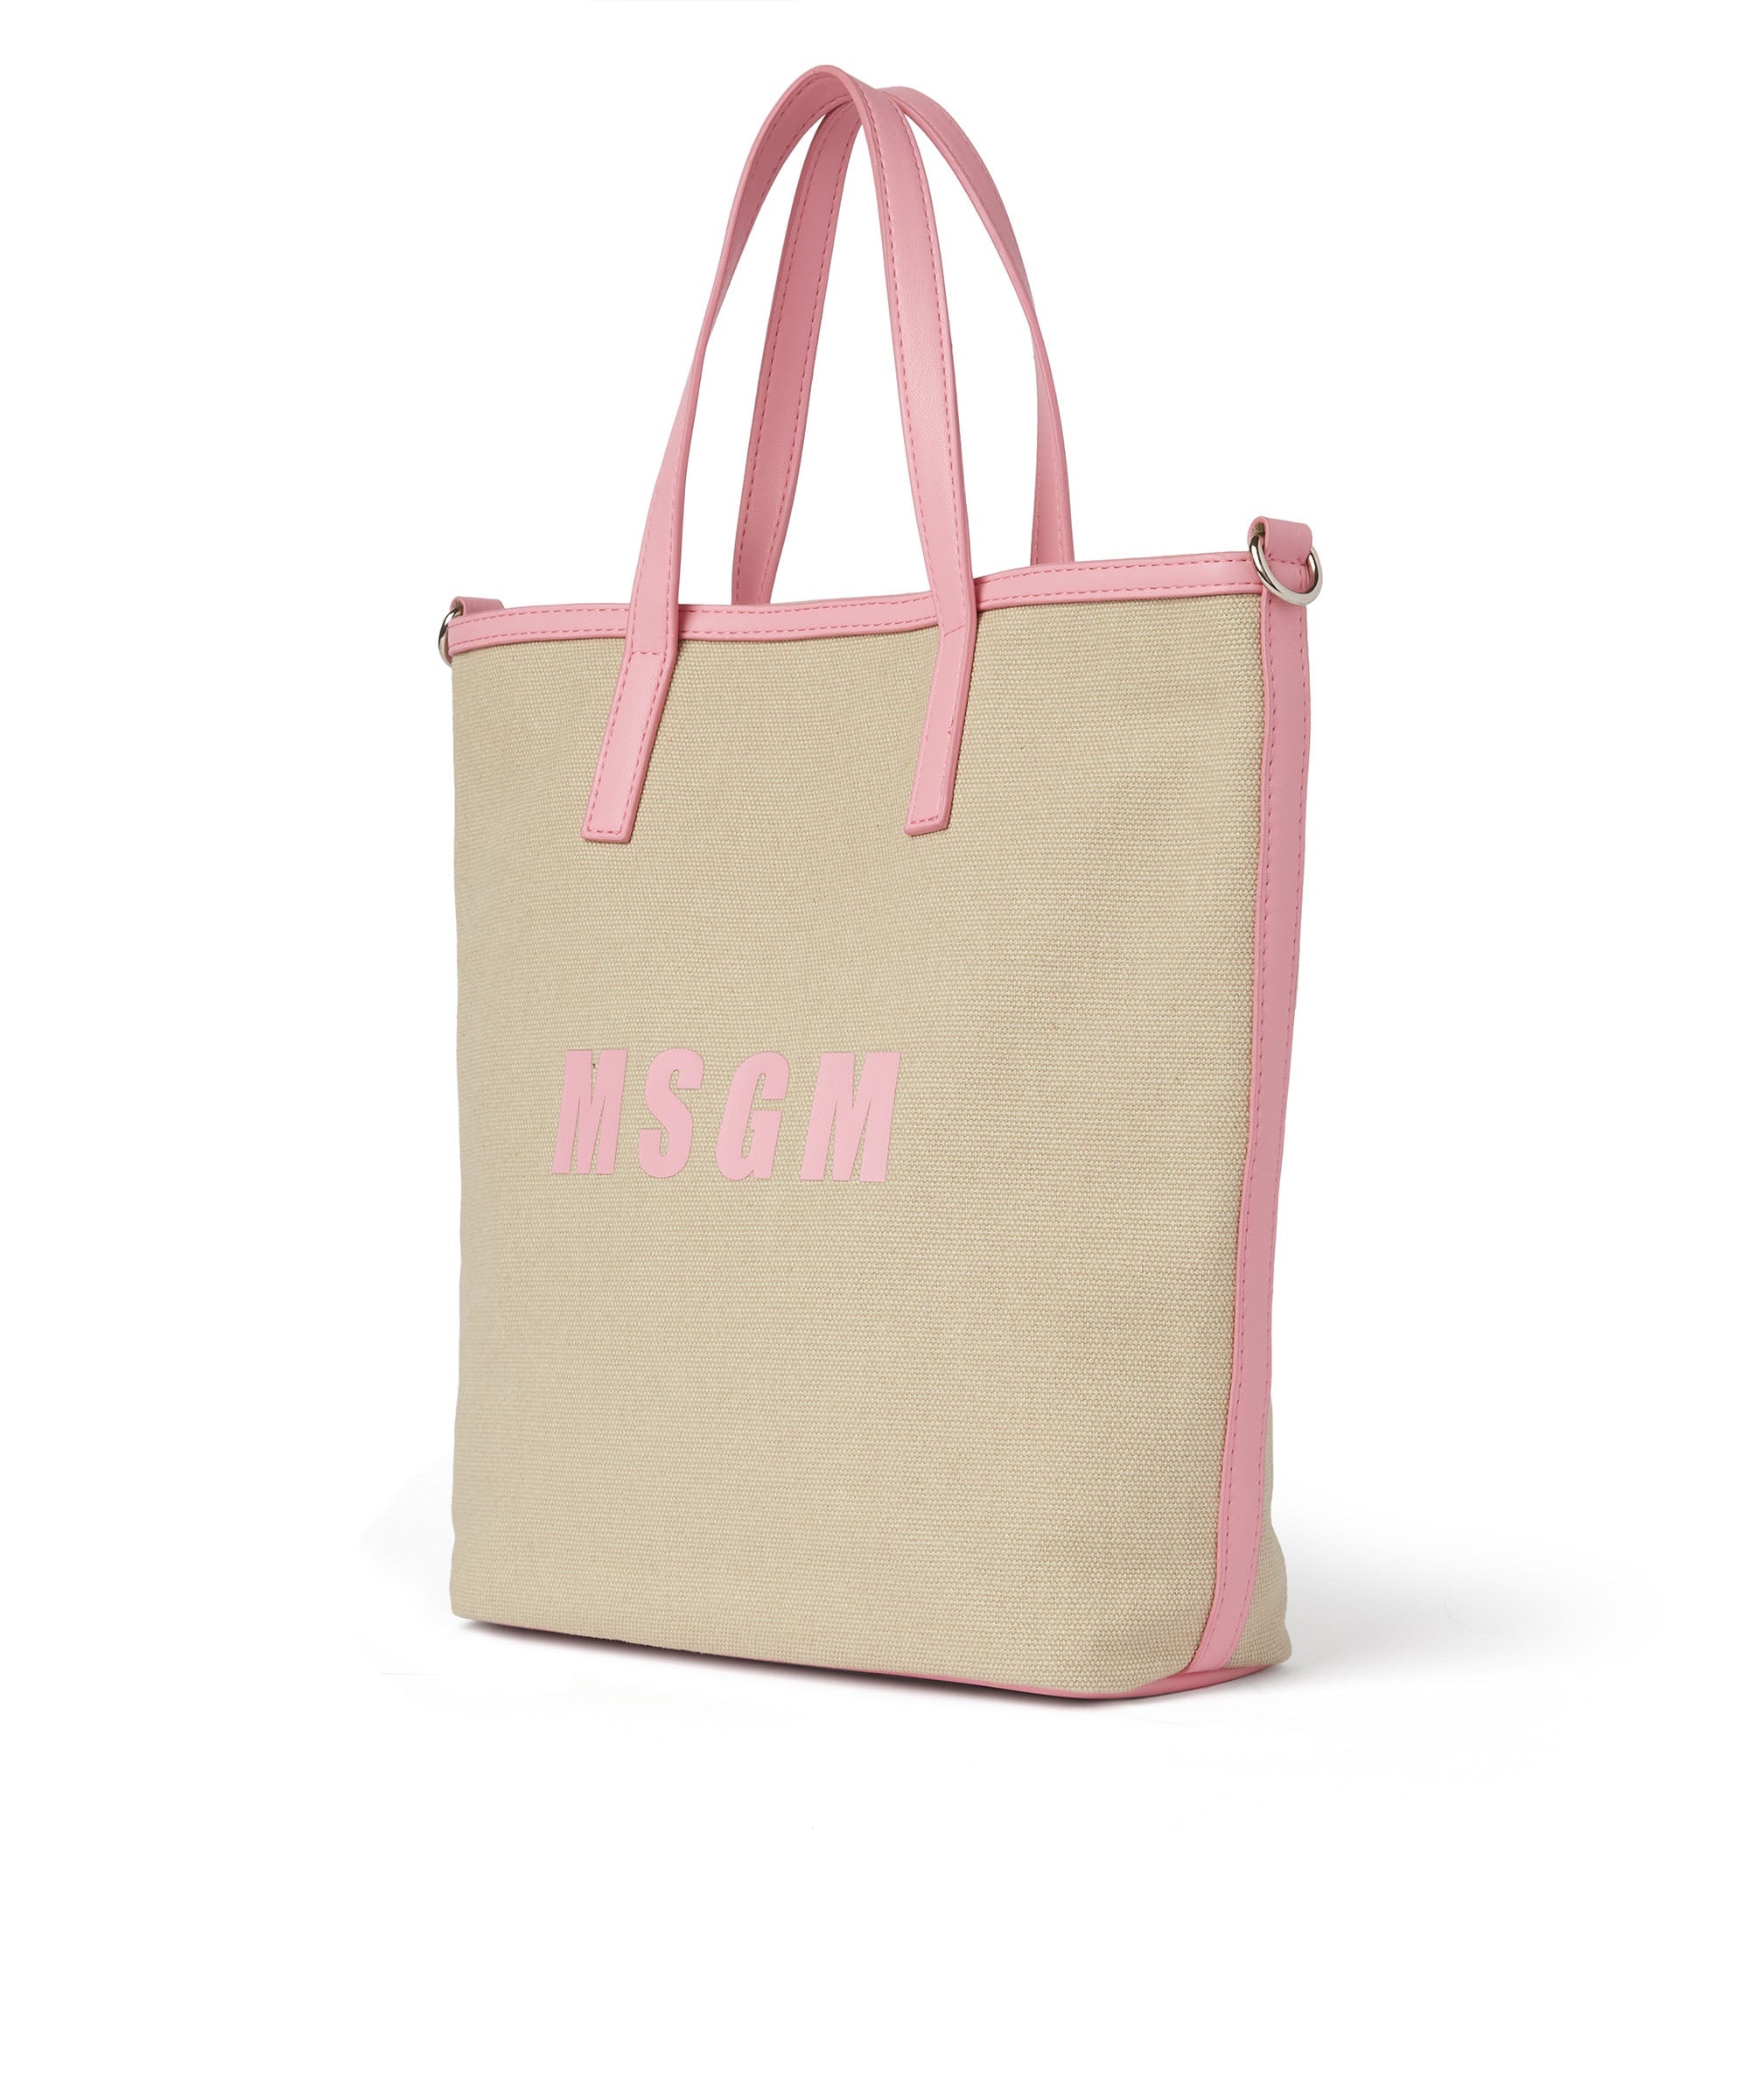 Canvas tote bag with piping and printed logo - 3